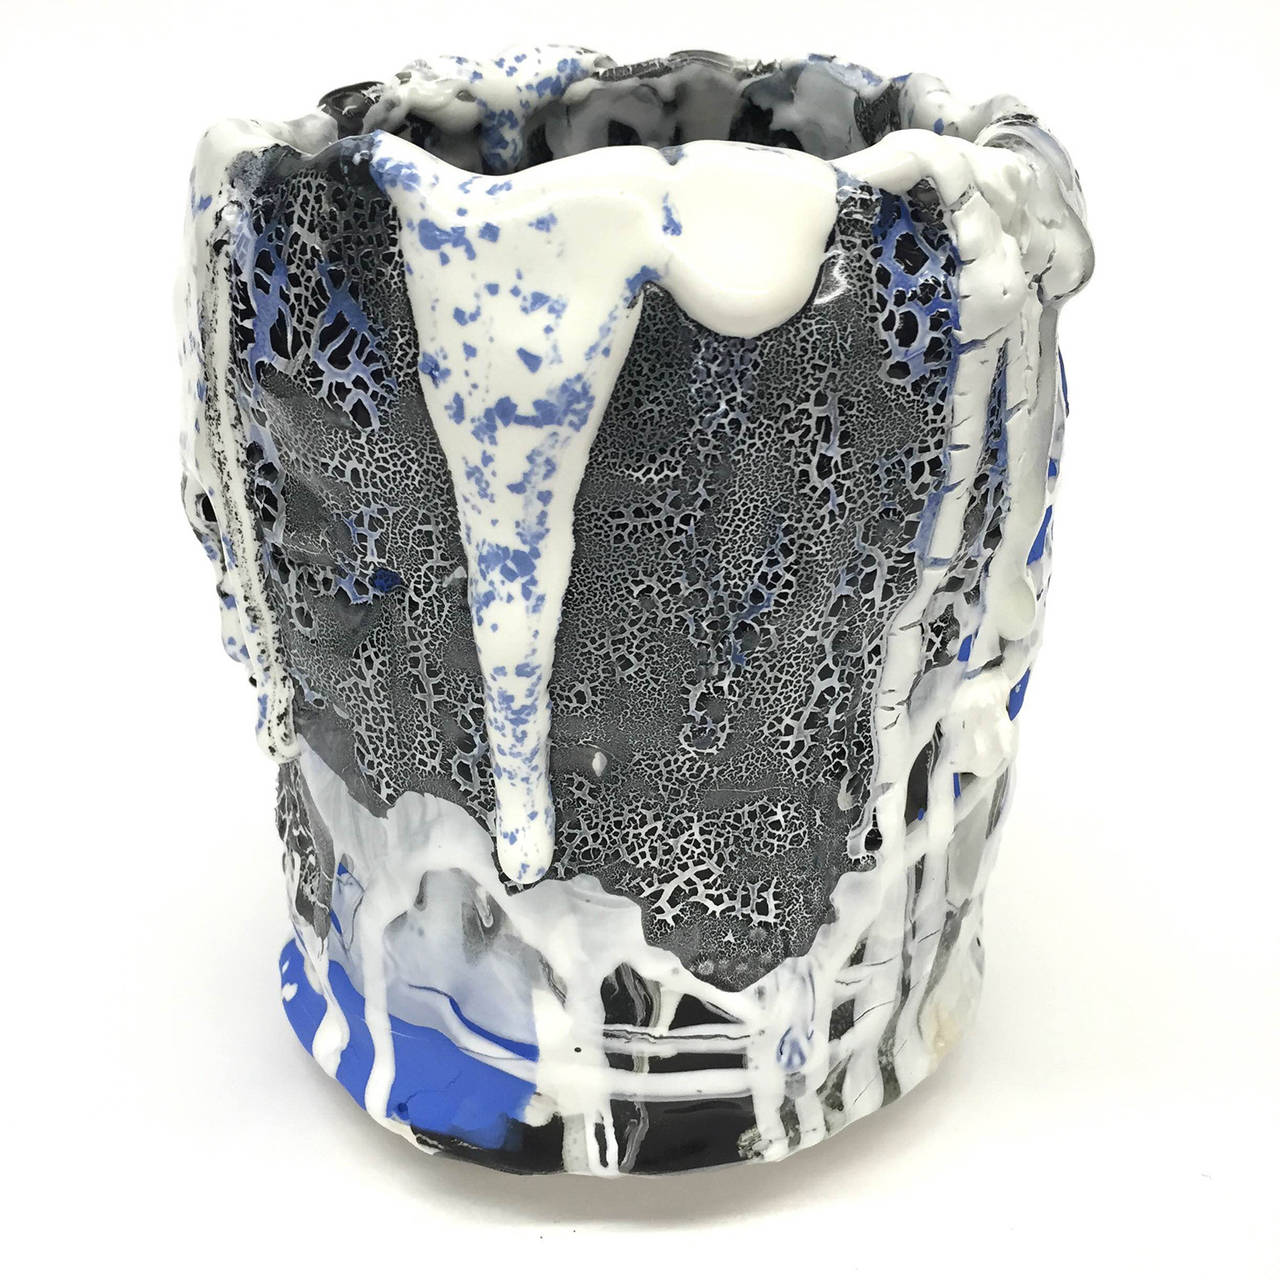 Contemporary ceramic vessel by LA based mixed-media sculptor Brian Rochefort for Kelly Behun Studio. Highly textured and worked surface resulting from multiple firings. Multicolored glazes including cobalt, black and white. Watertight, may be used